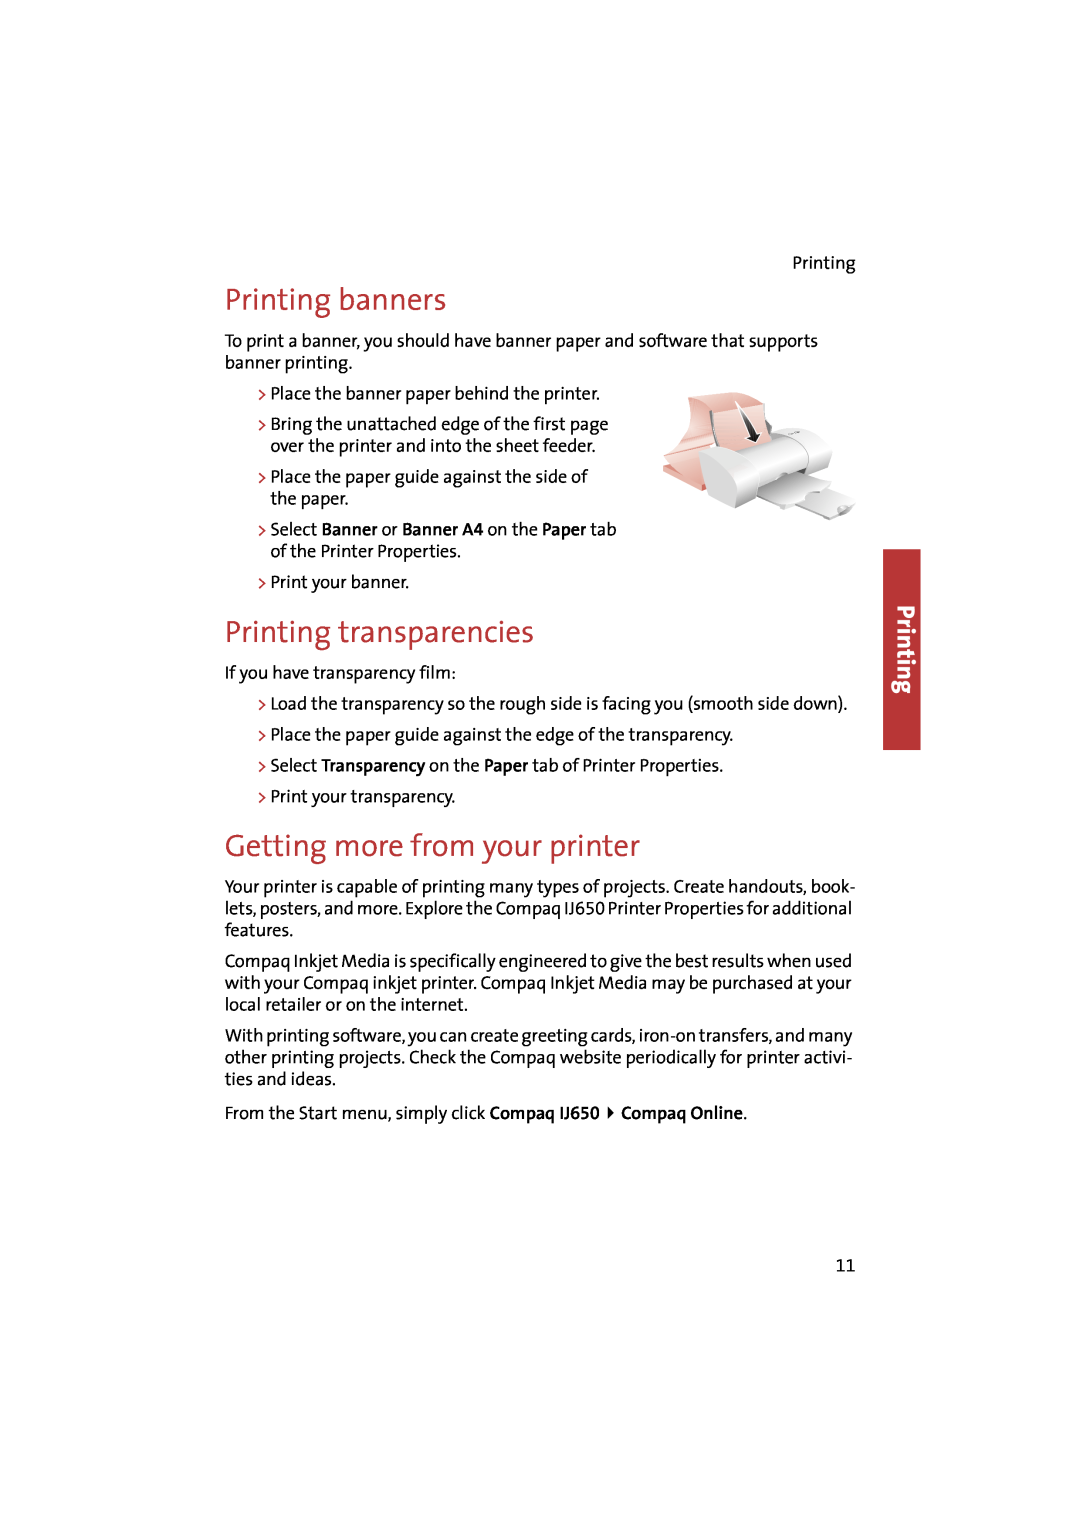 Compaq IJ650 manual Printing banners, Printing transparencies, Getting more from your printer 